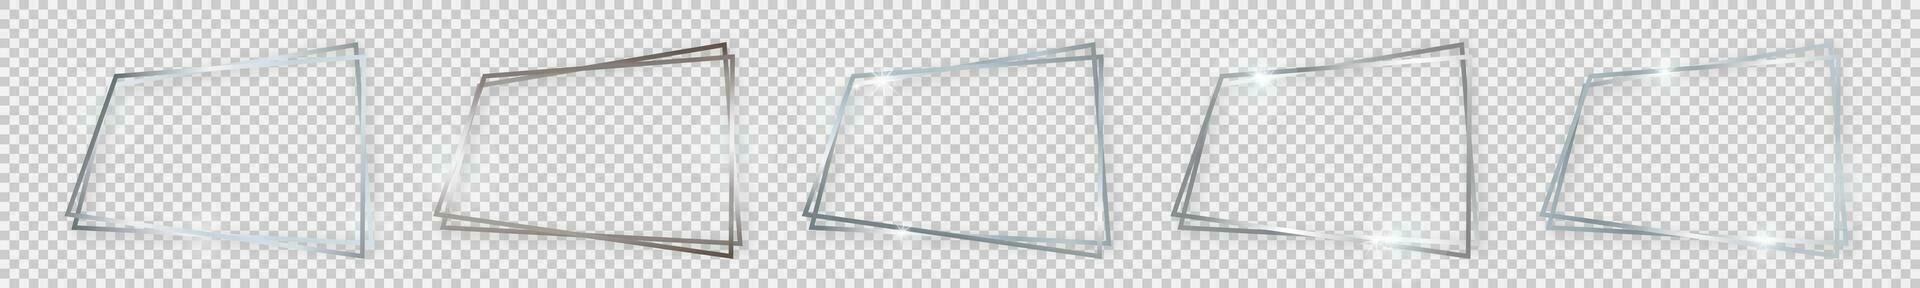 Set of five double silver shiny rectangular frames with glowing effects and shadows on background. Vector illustration